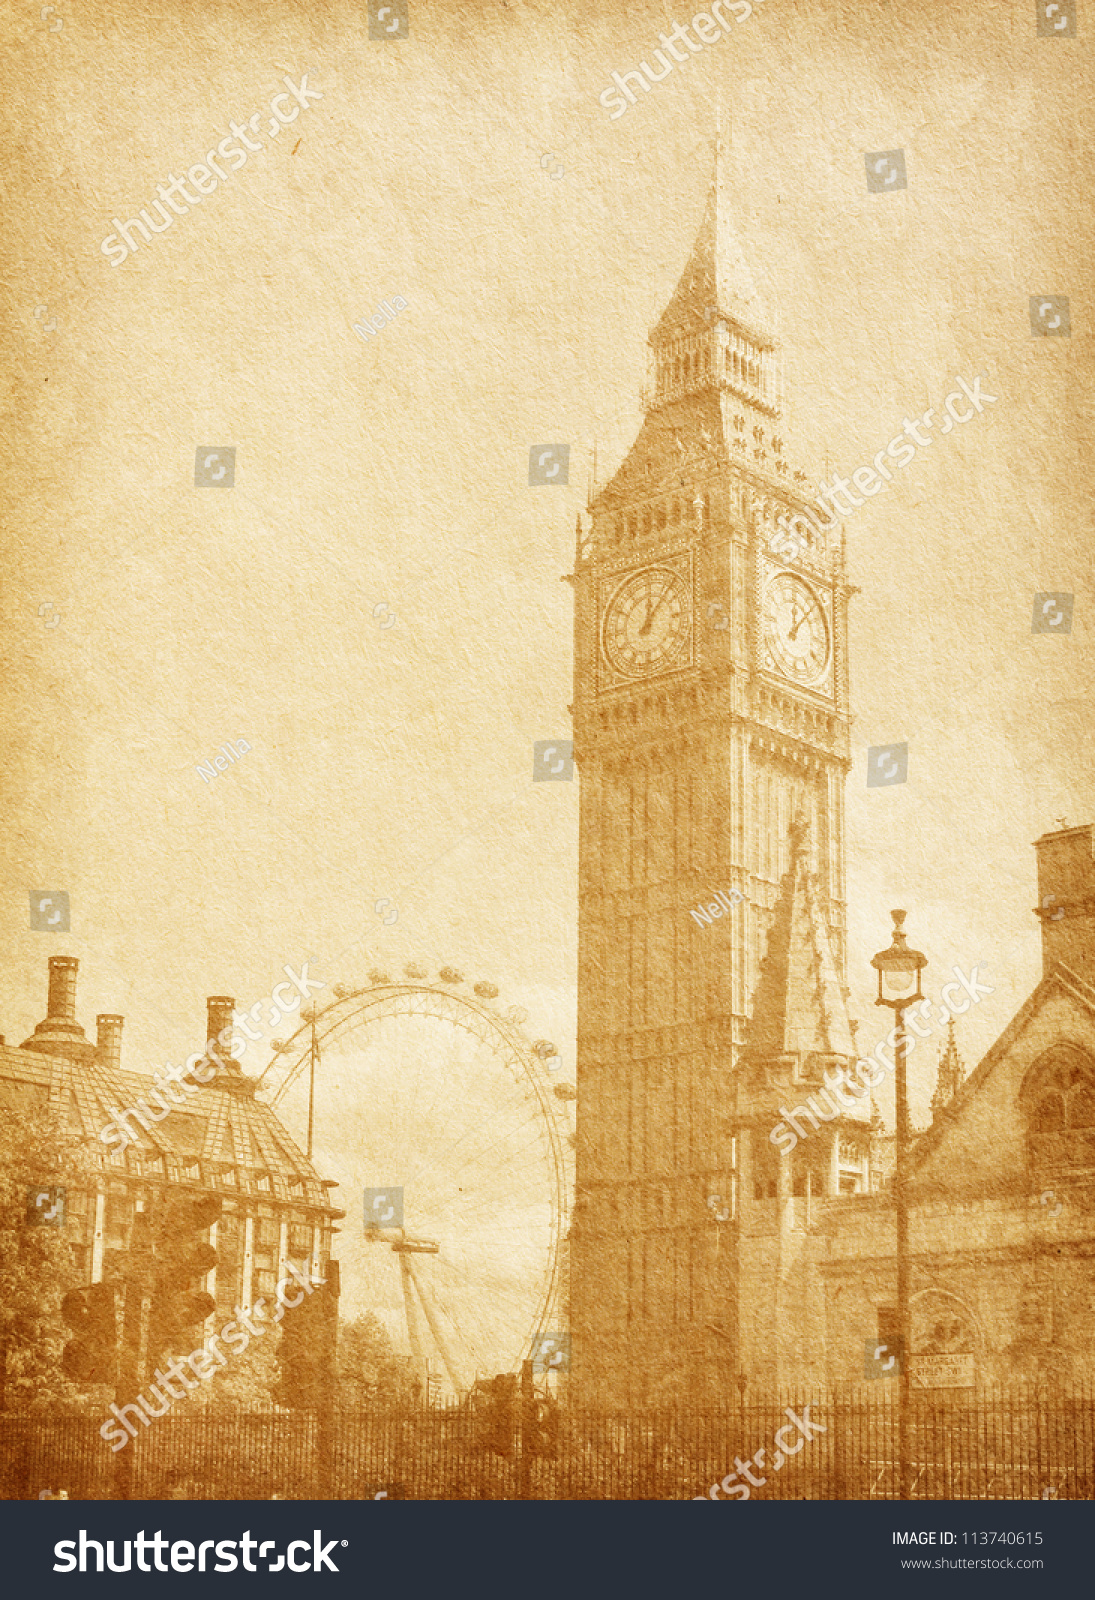 Old Paper Texture. London, Uk. View From Abingdon Street. Sepia Stock Photo 113740615 : Shutterstock